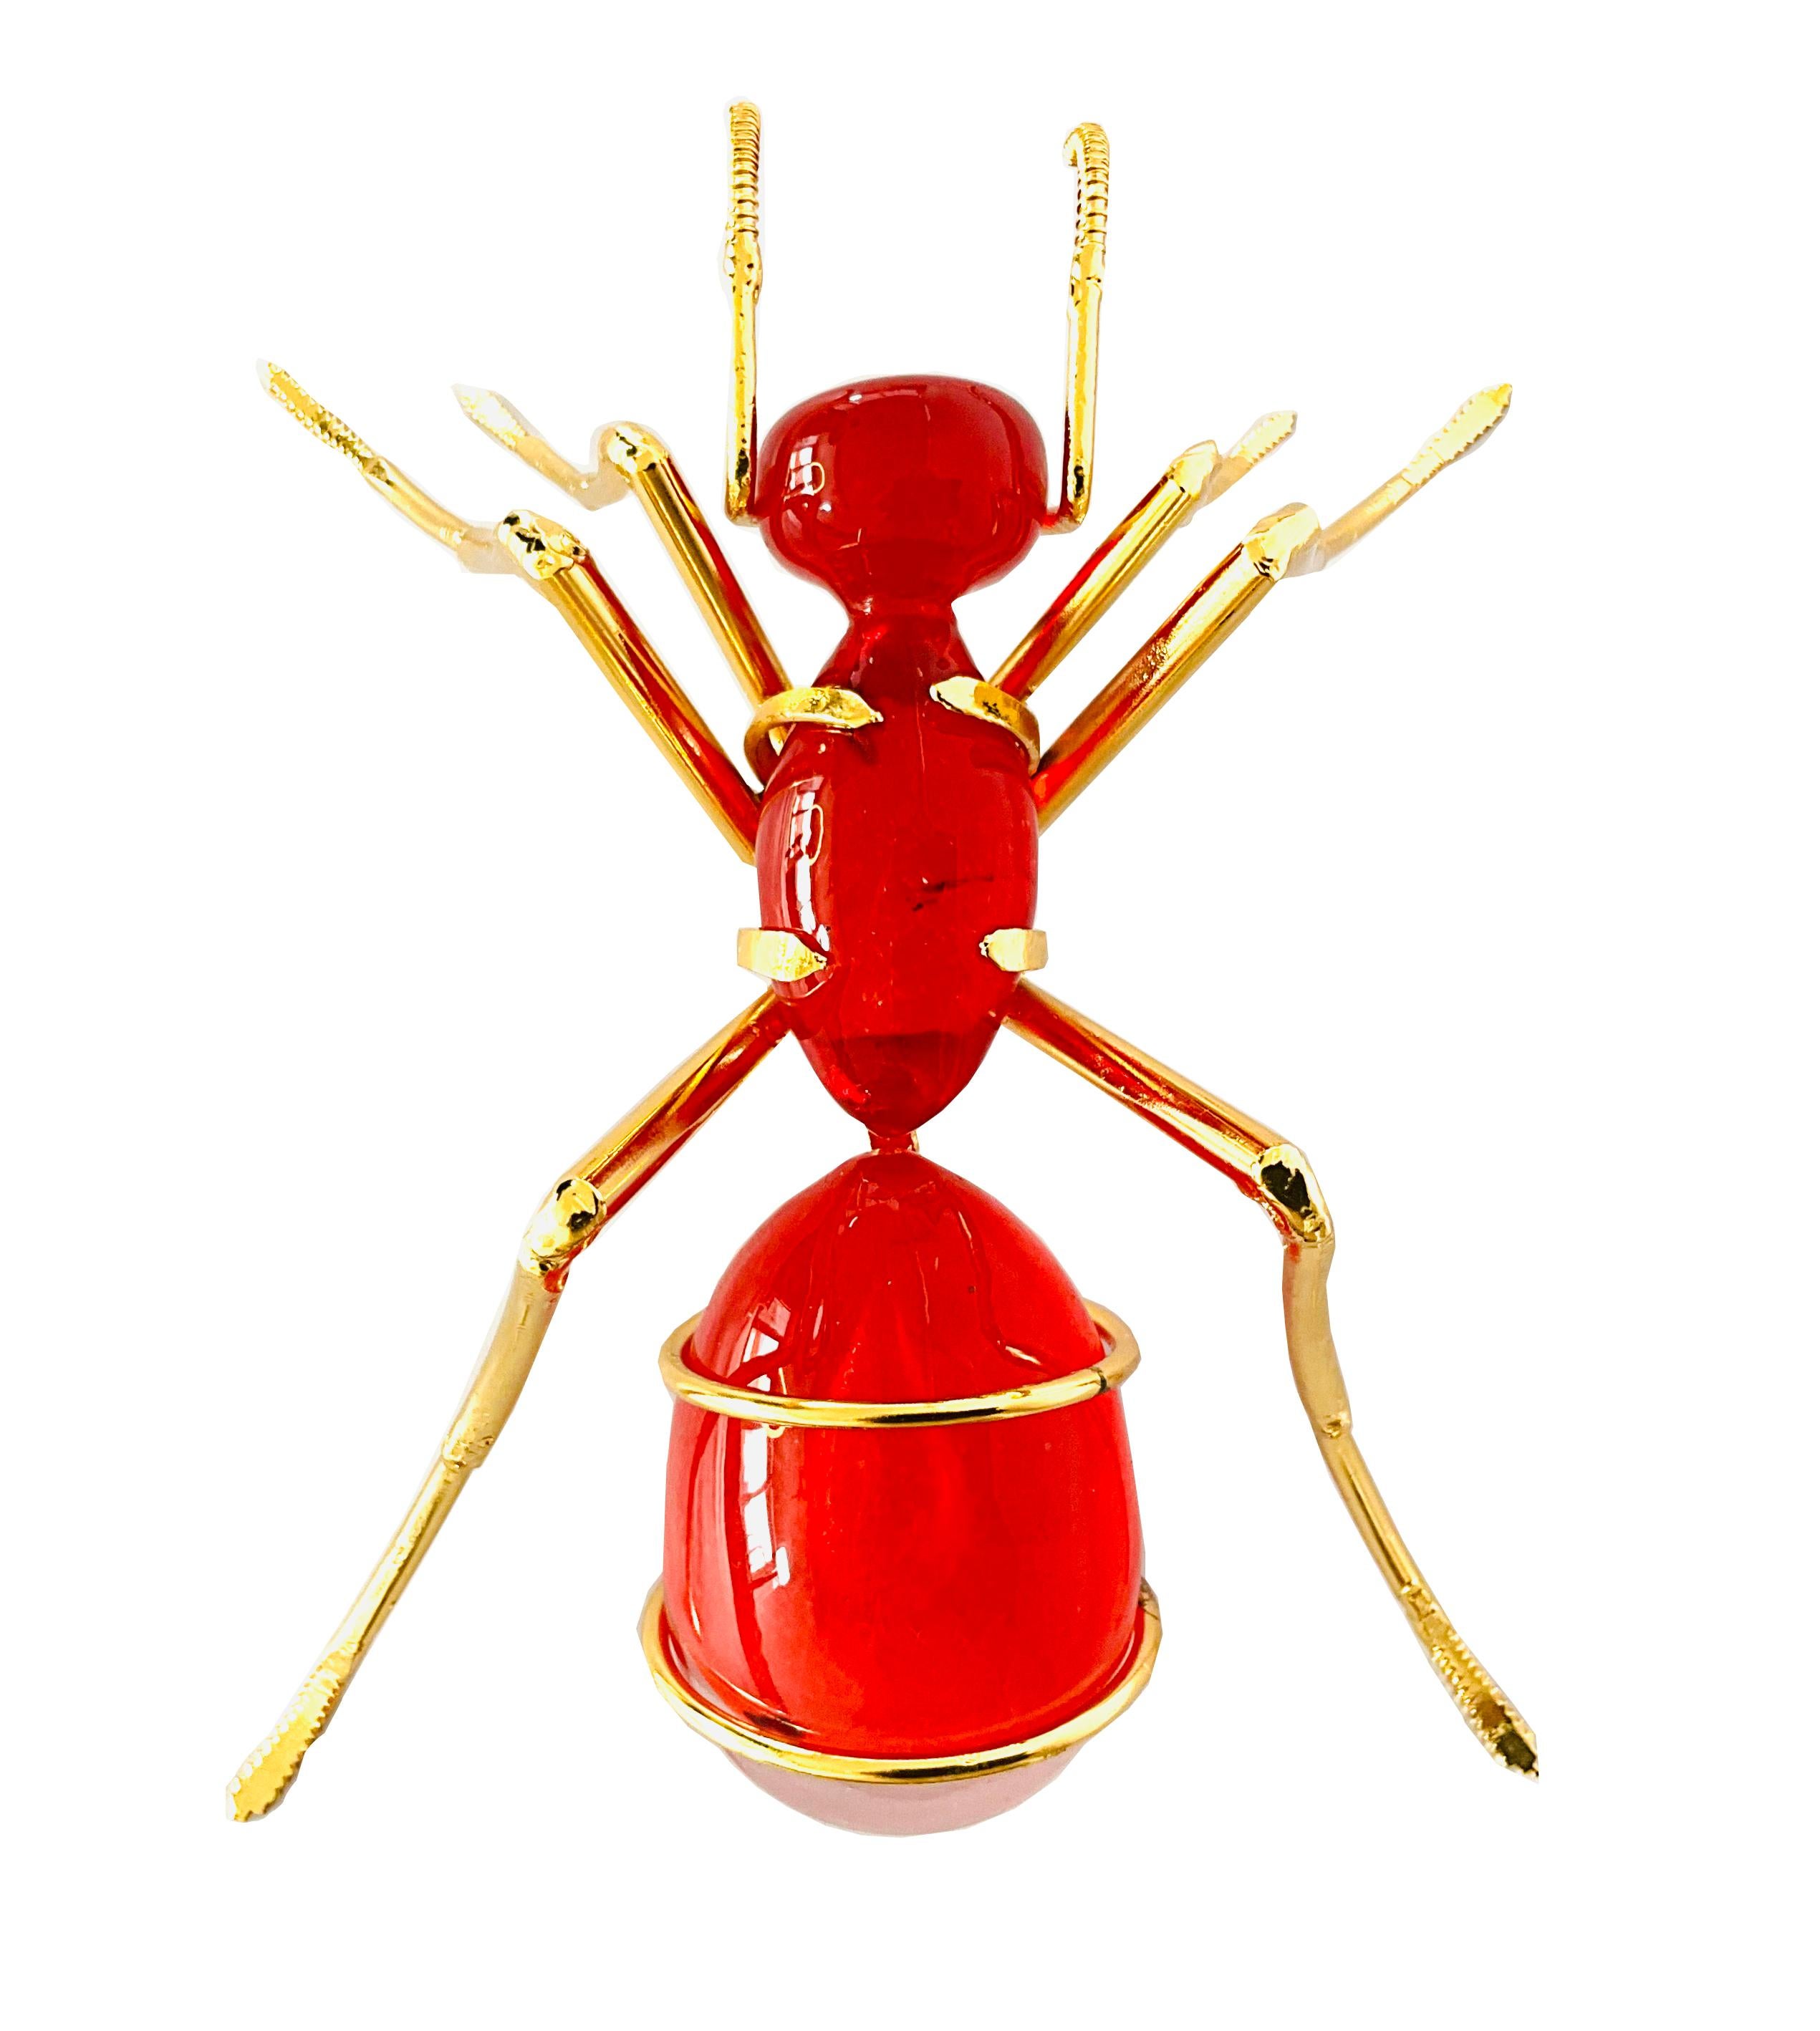 The Ant, Gold Plated and Red Glass

The sculpture by Marcos Romero, representing an ant made of recycled industrial iron and blown glass, is a fascinating work of contemporary art. Romero has created a piece that combines the hardness and resistance